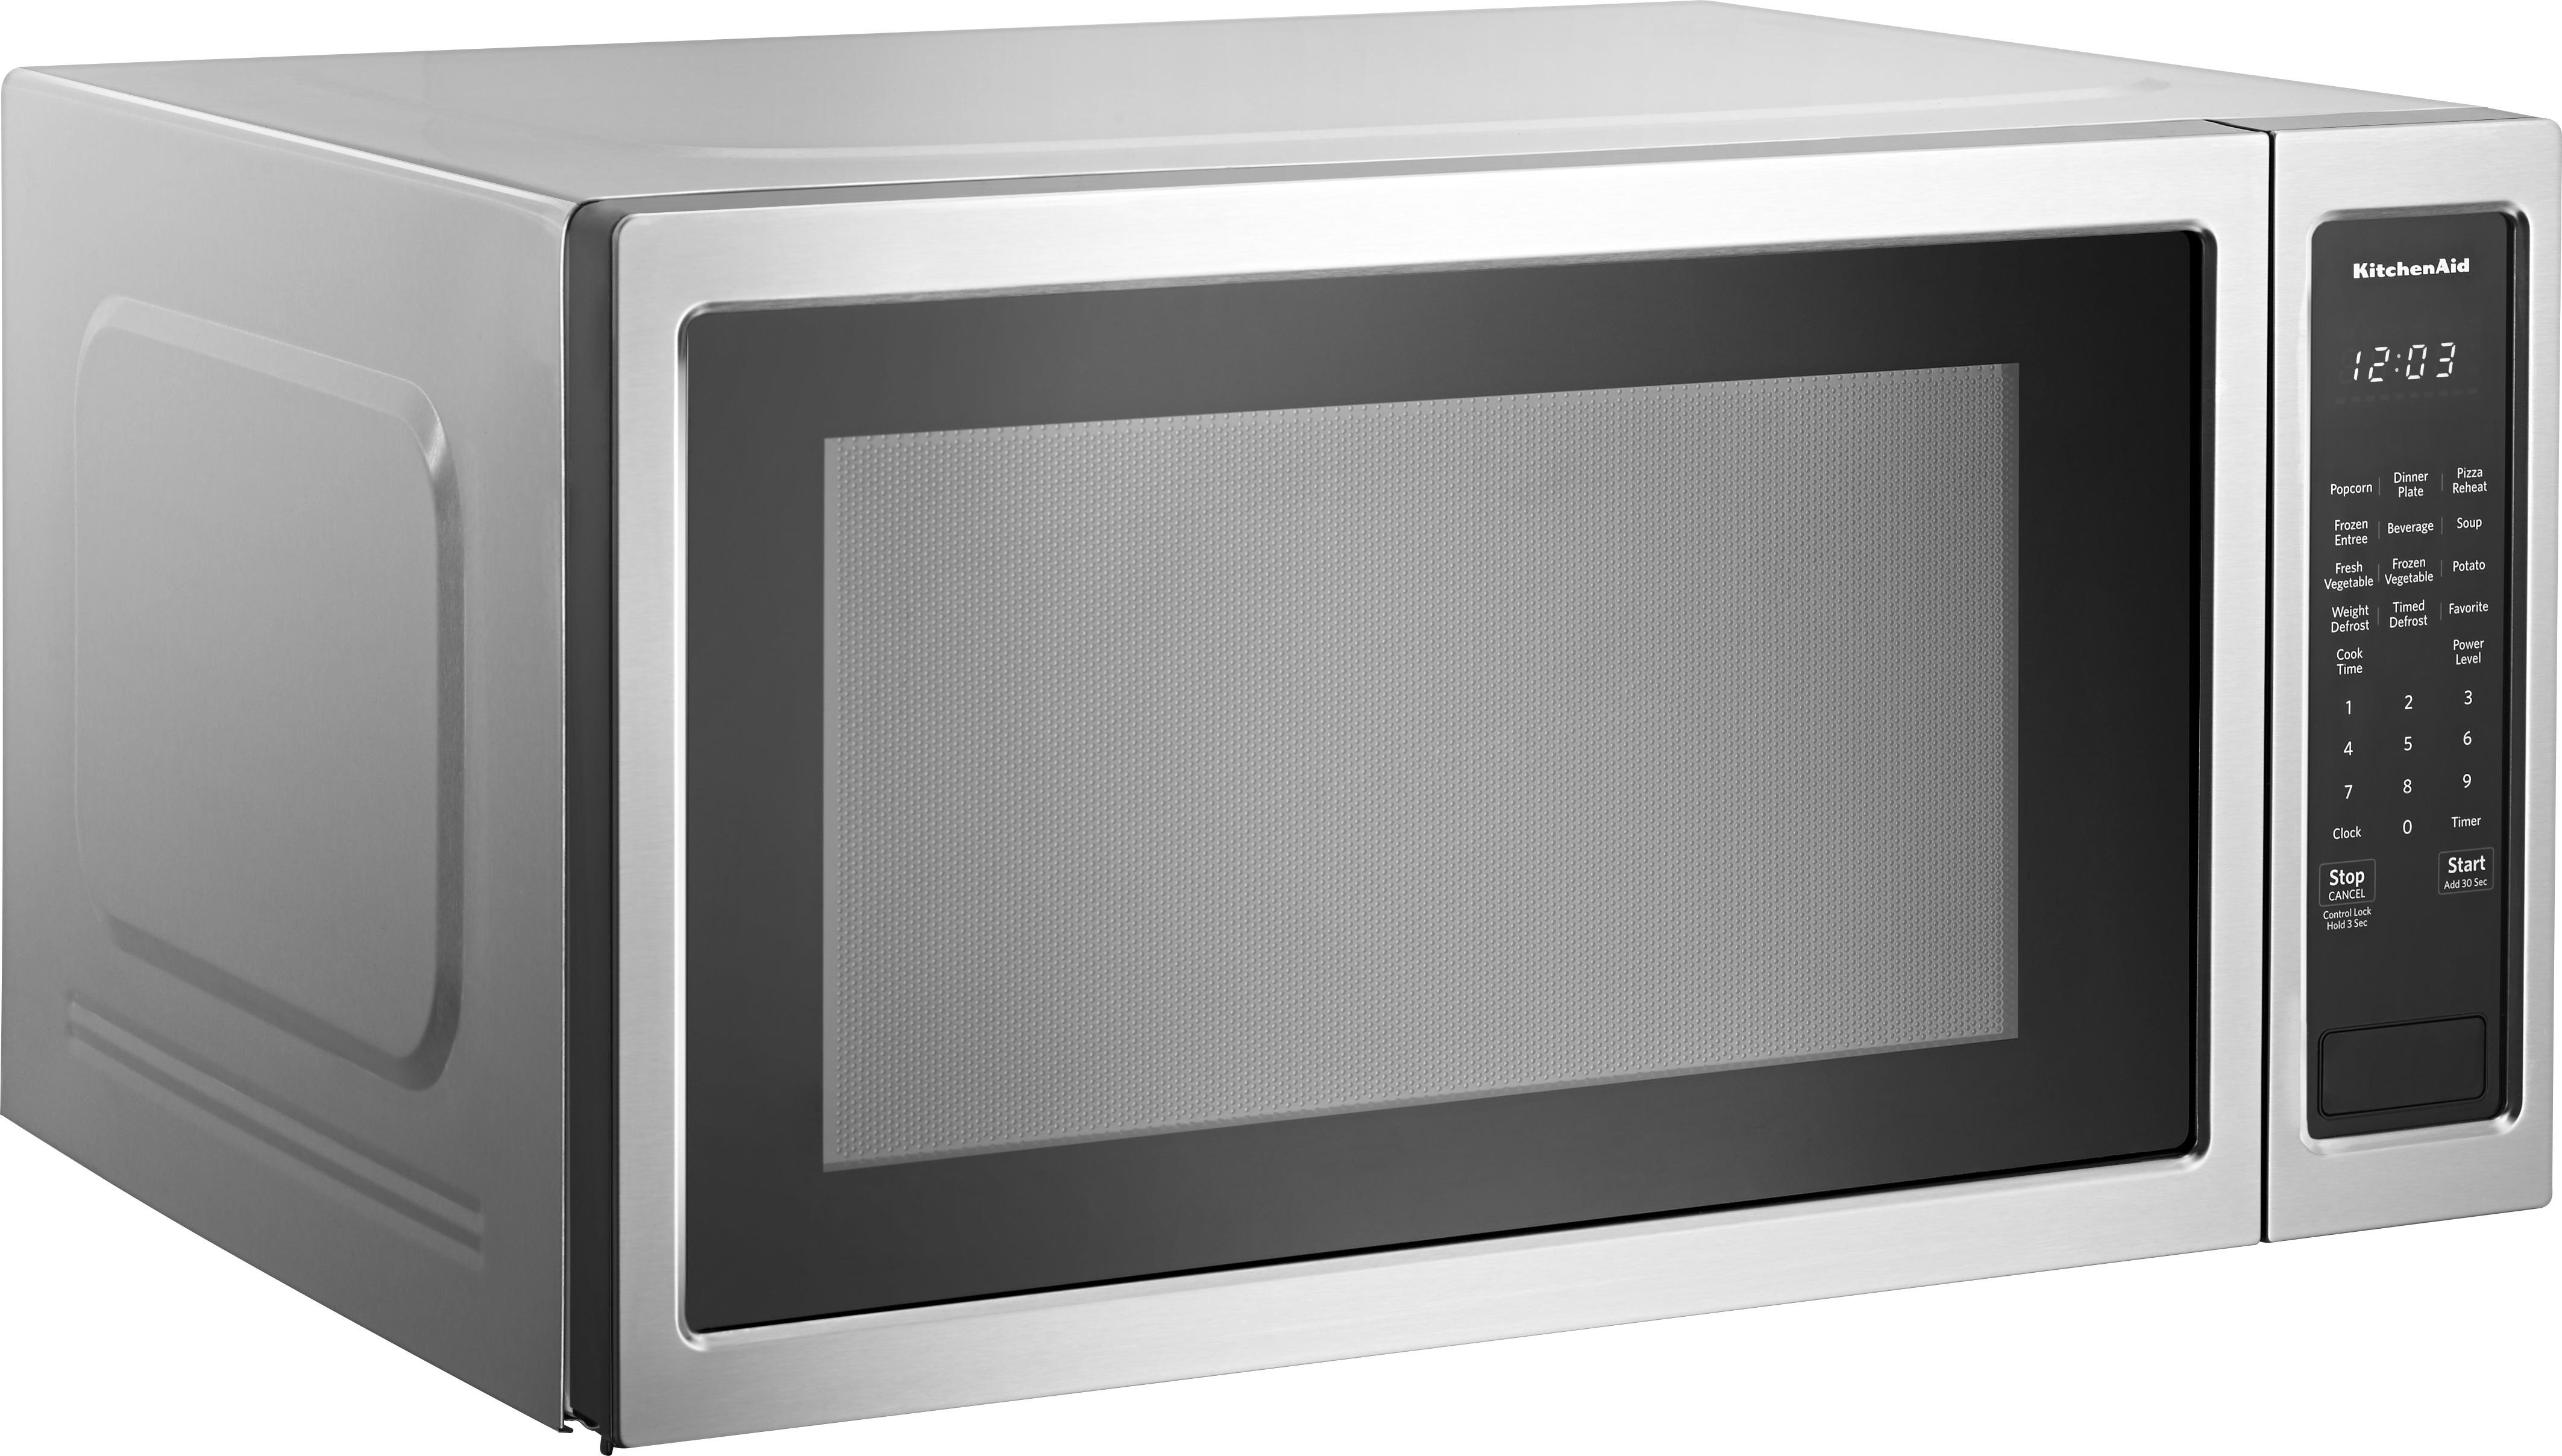 Angle View: KitchenAid - 2.2 Cu. Ft. Microwave with Sensor Cooking - Stainless steel